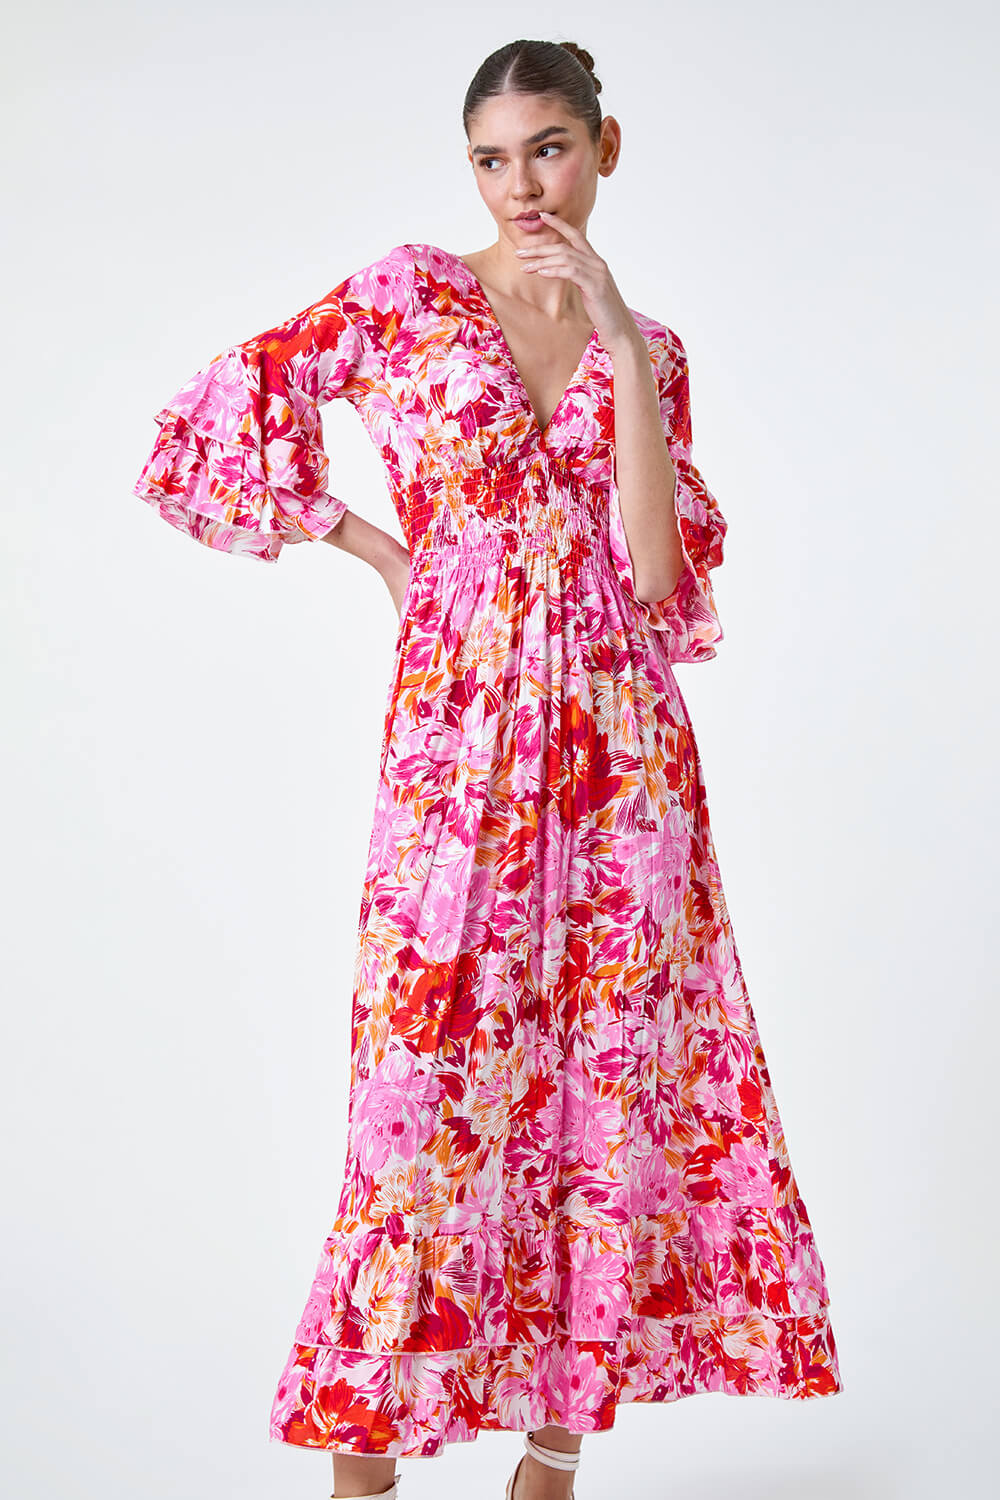 PINK Floral Ruffle Detail Shirred Maxi Dress, Image 2 of 5